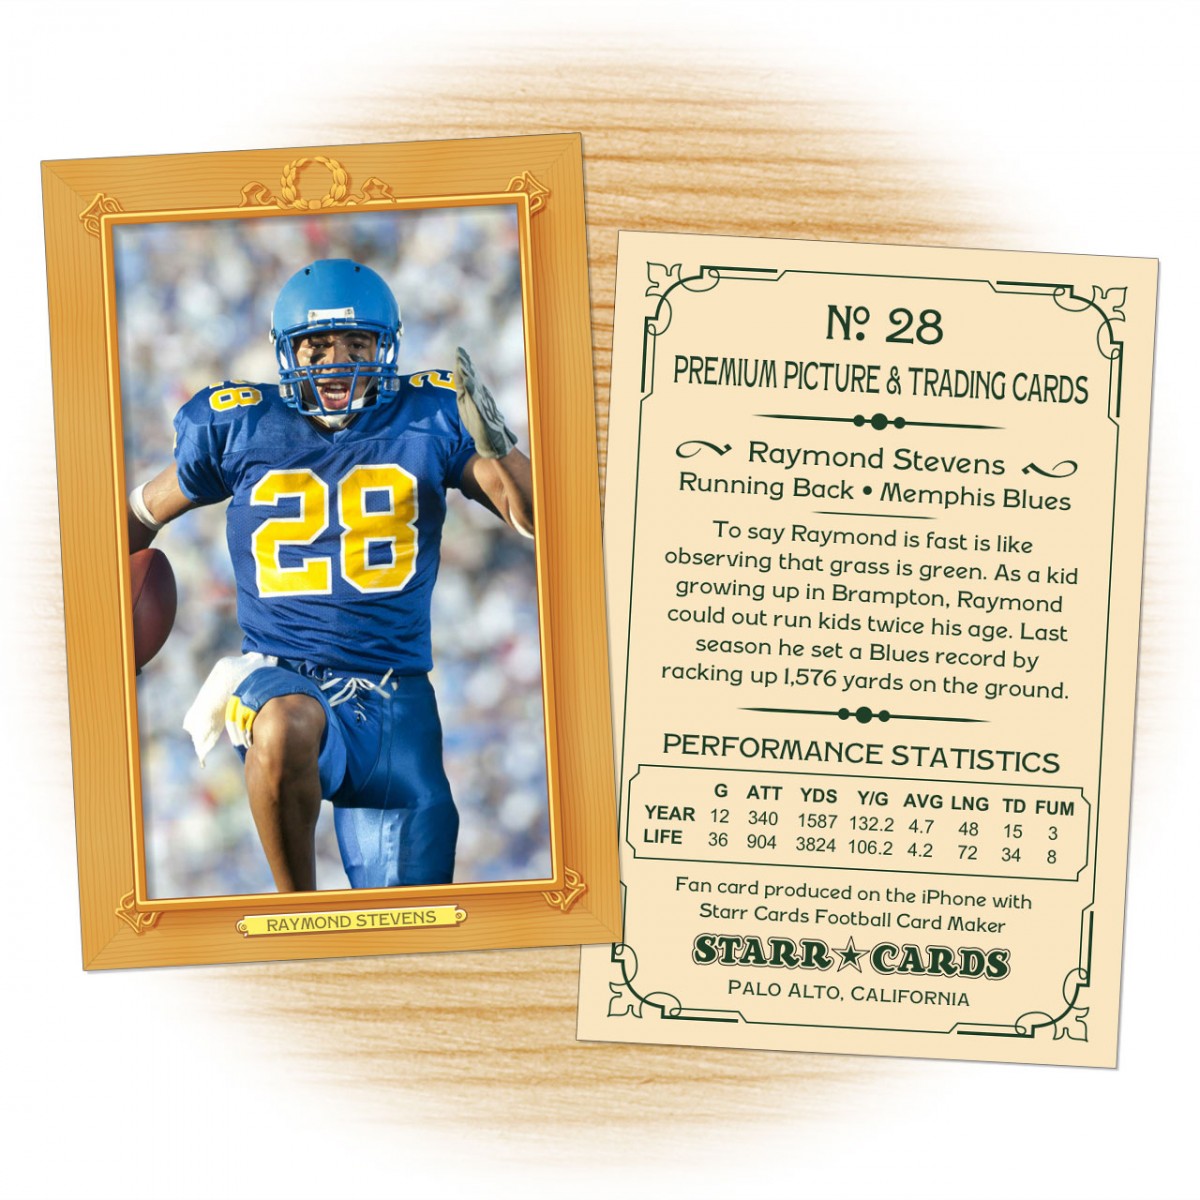 make-your-own-football-card-with-starr-cards